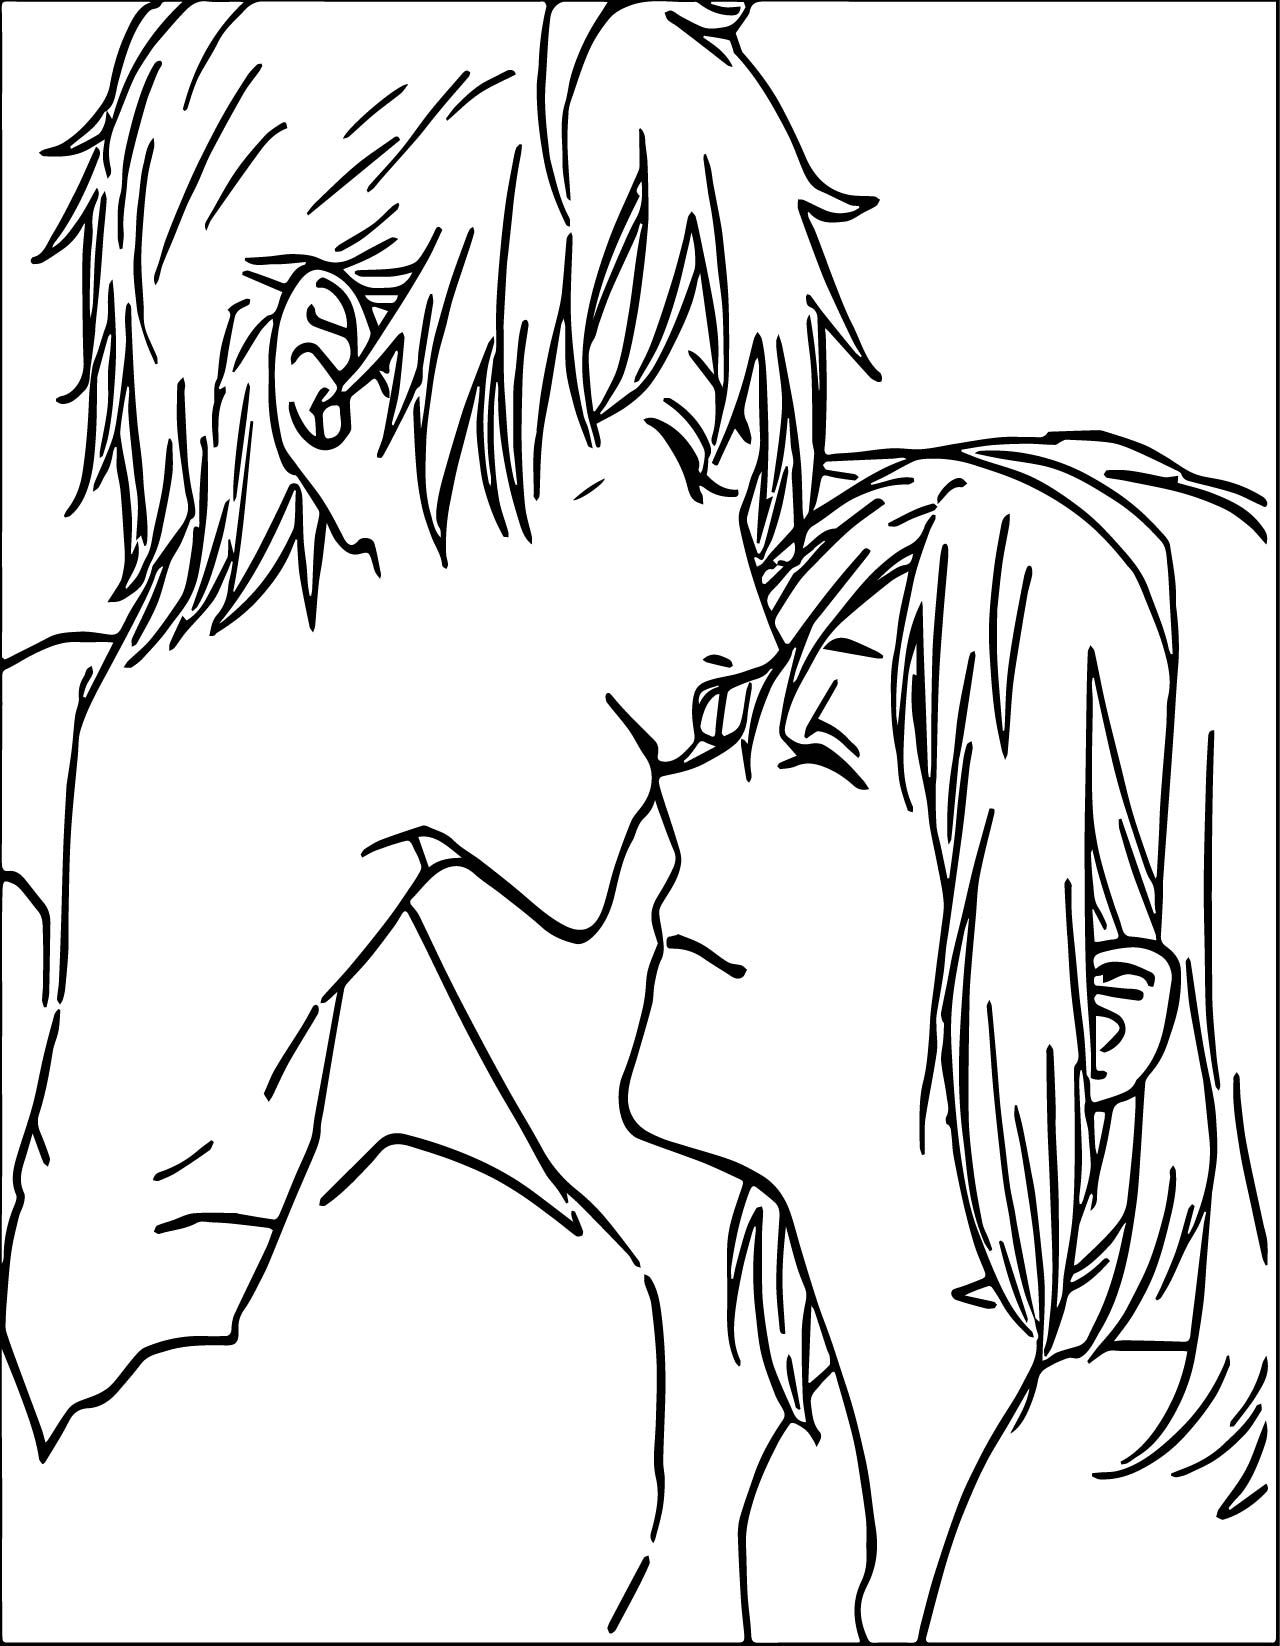 Awesome Anime Boy And Girl Couple Love Coloring Page   Love ...